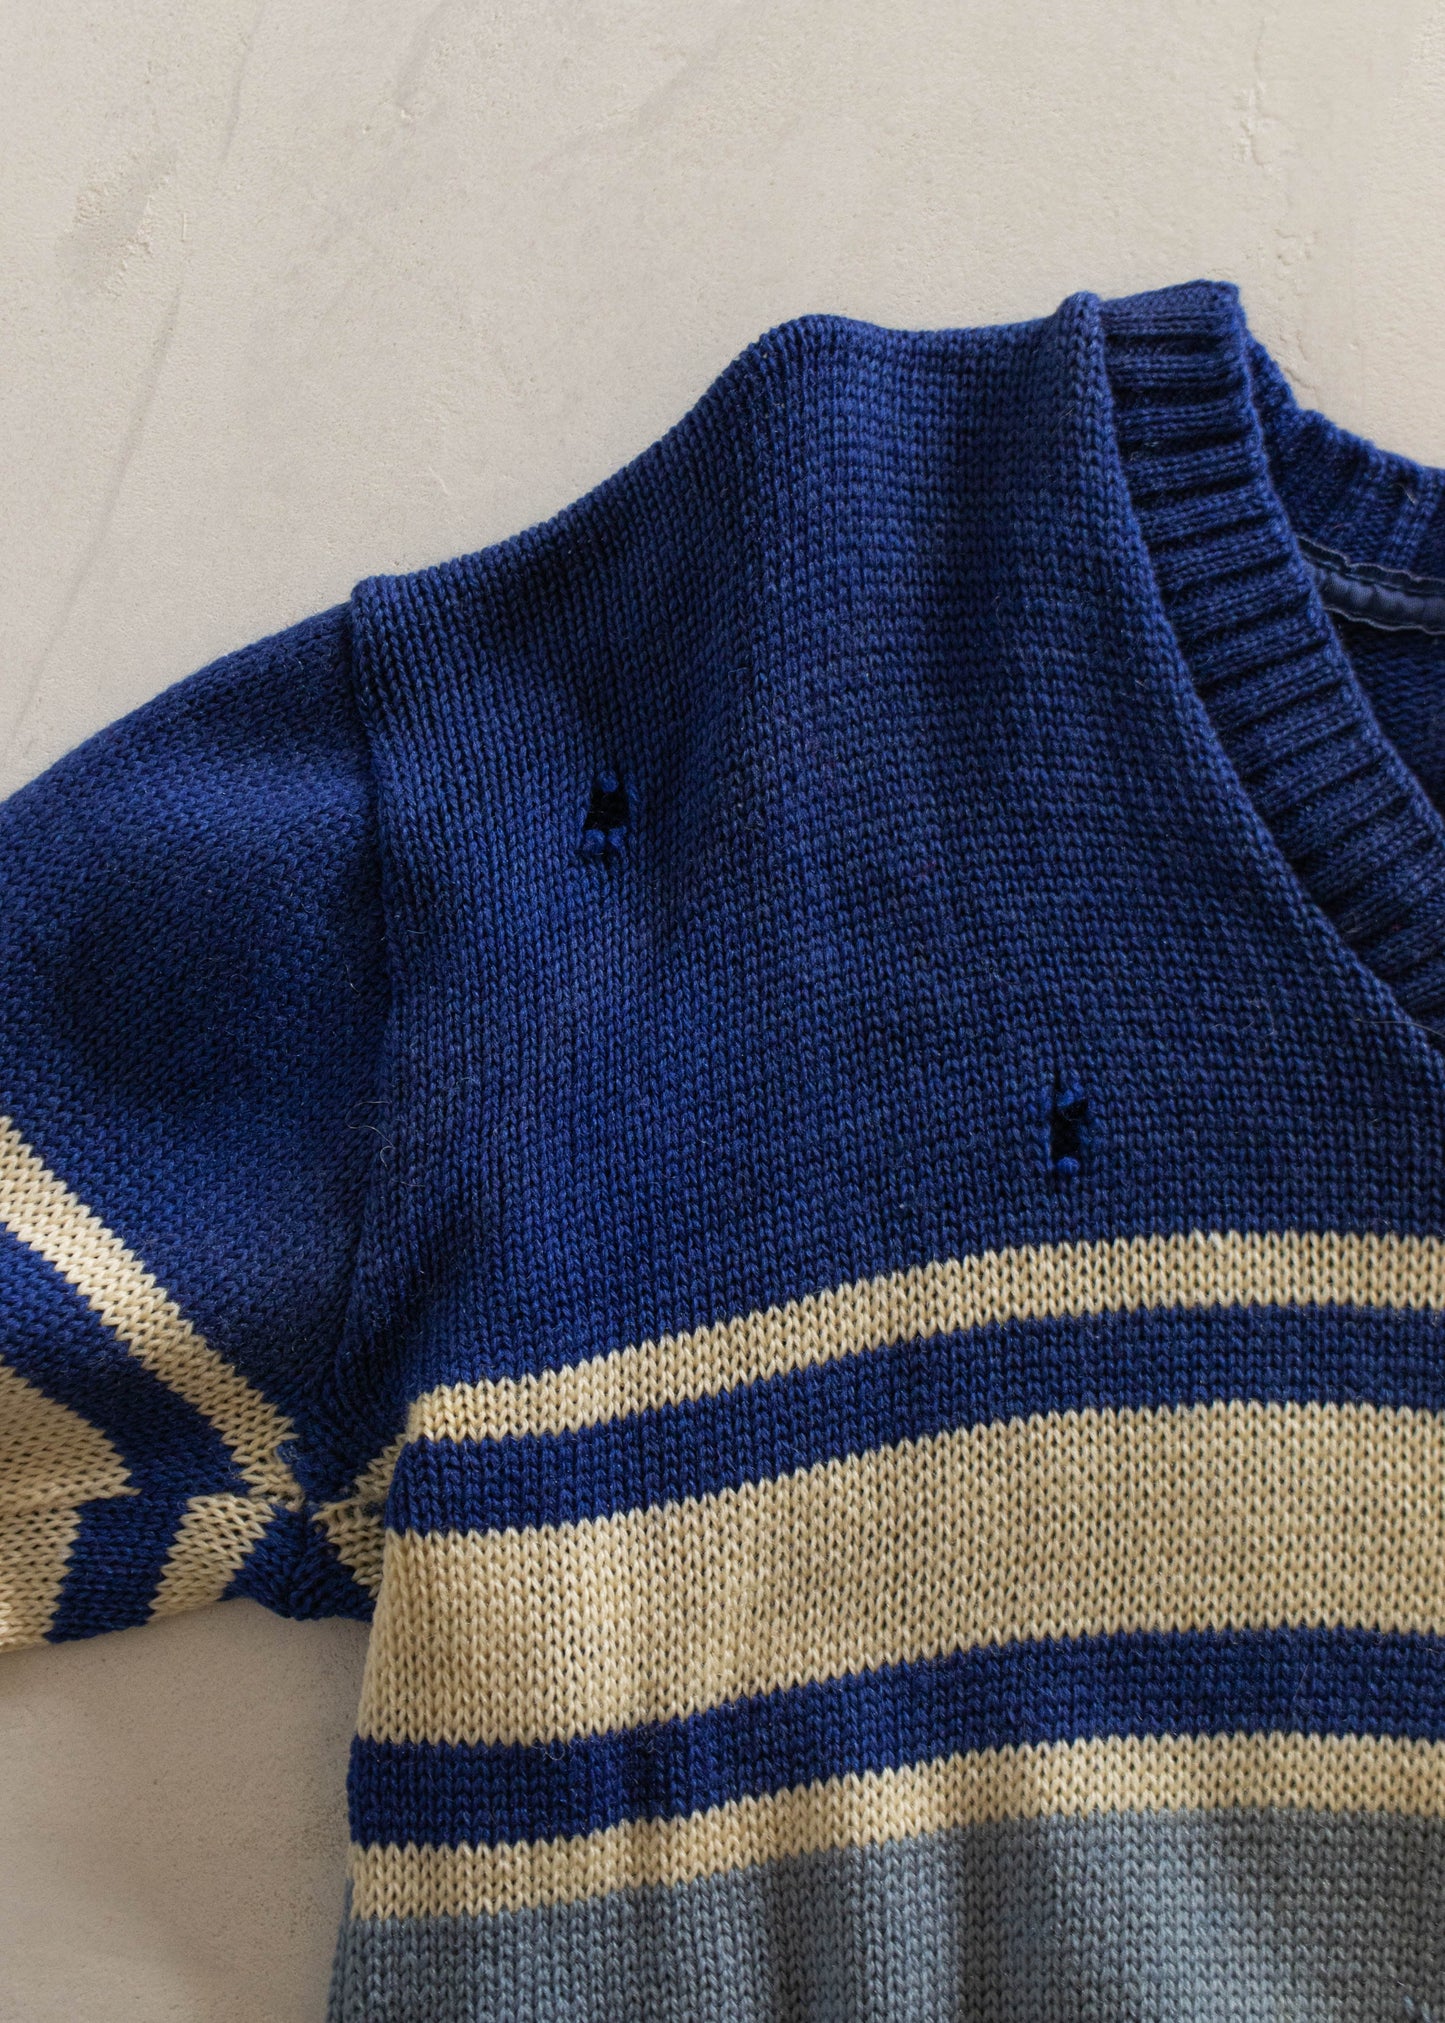 1950s Brent Wool Pullover Sweater Size S/M